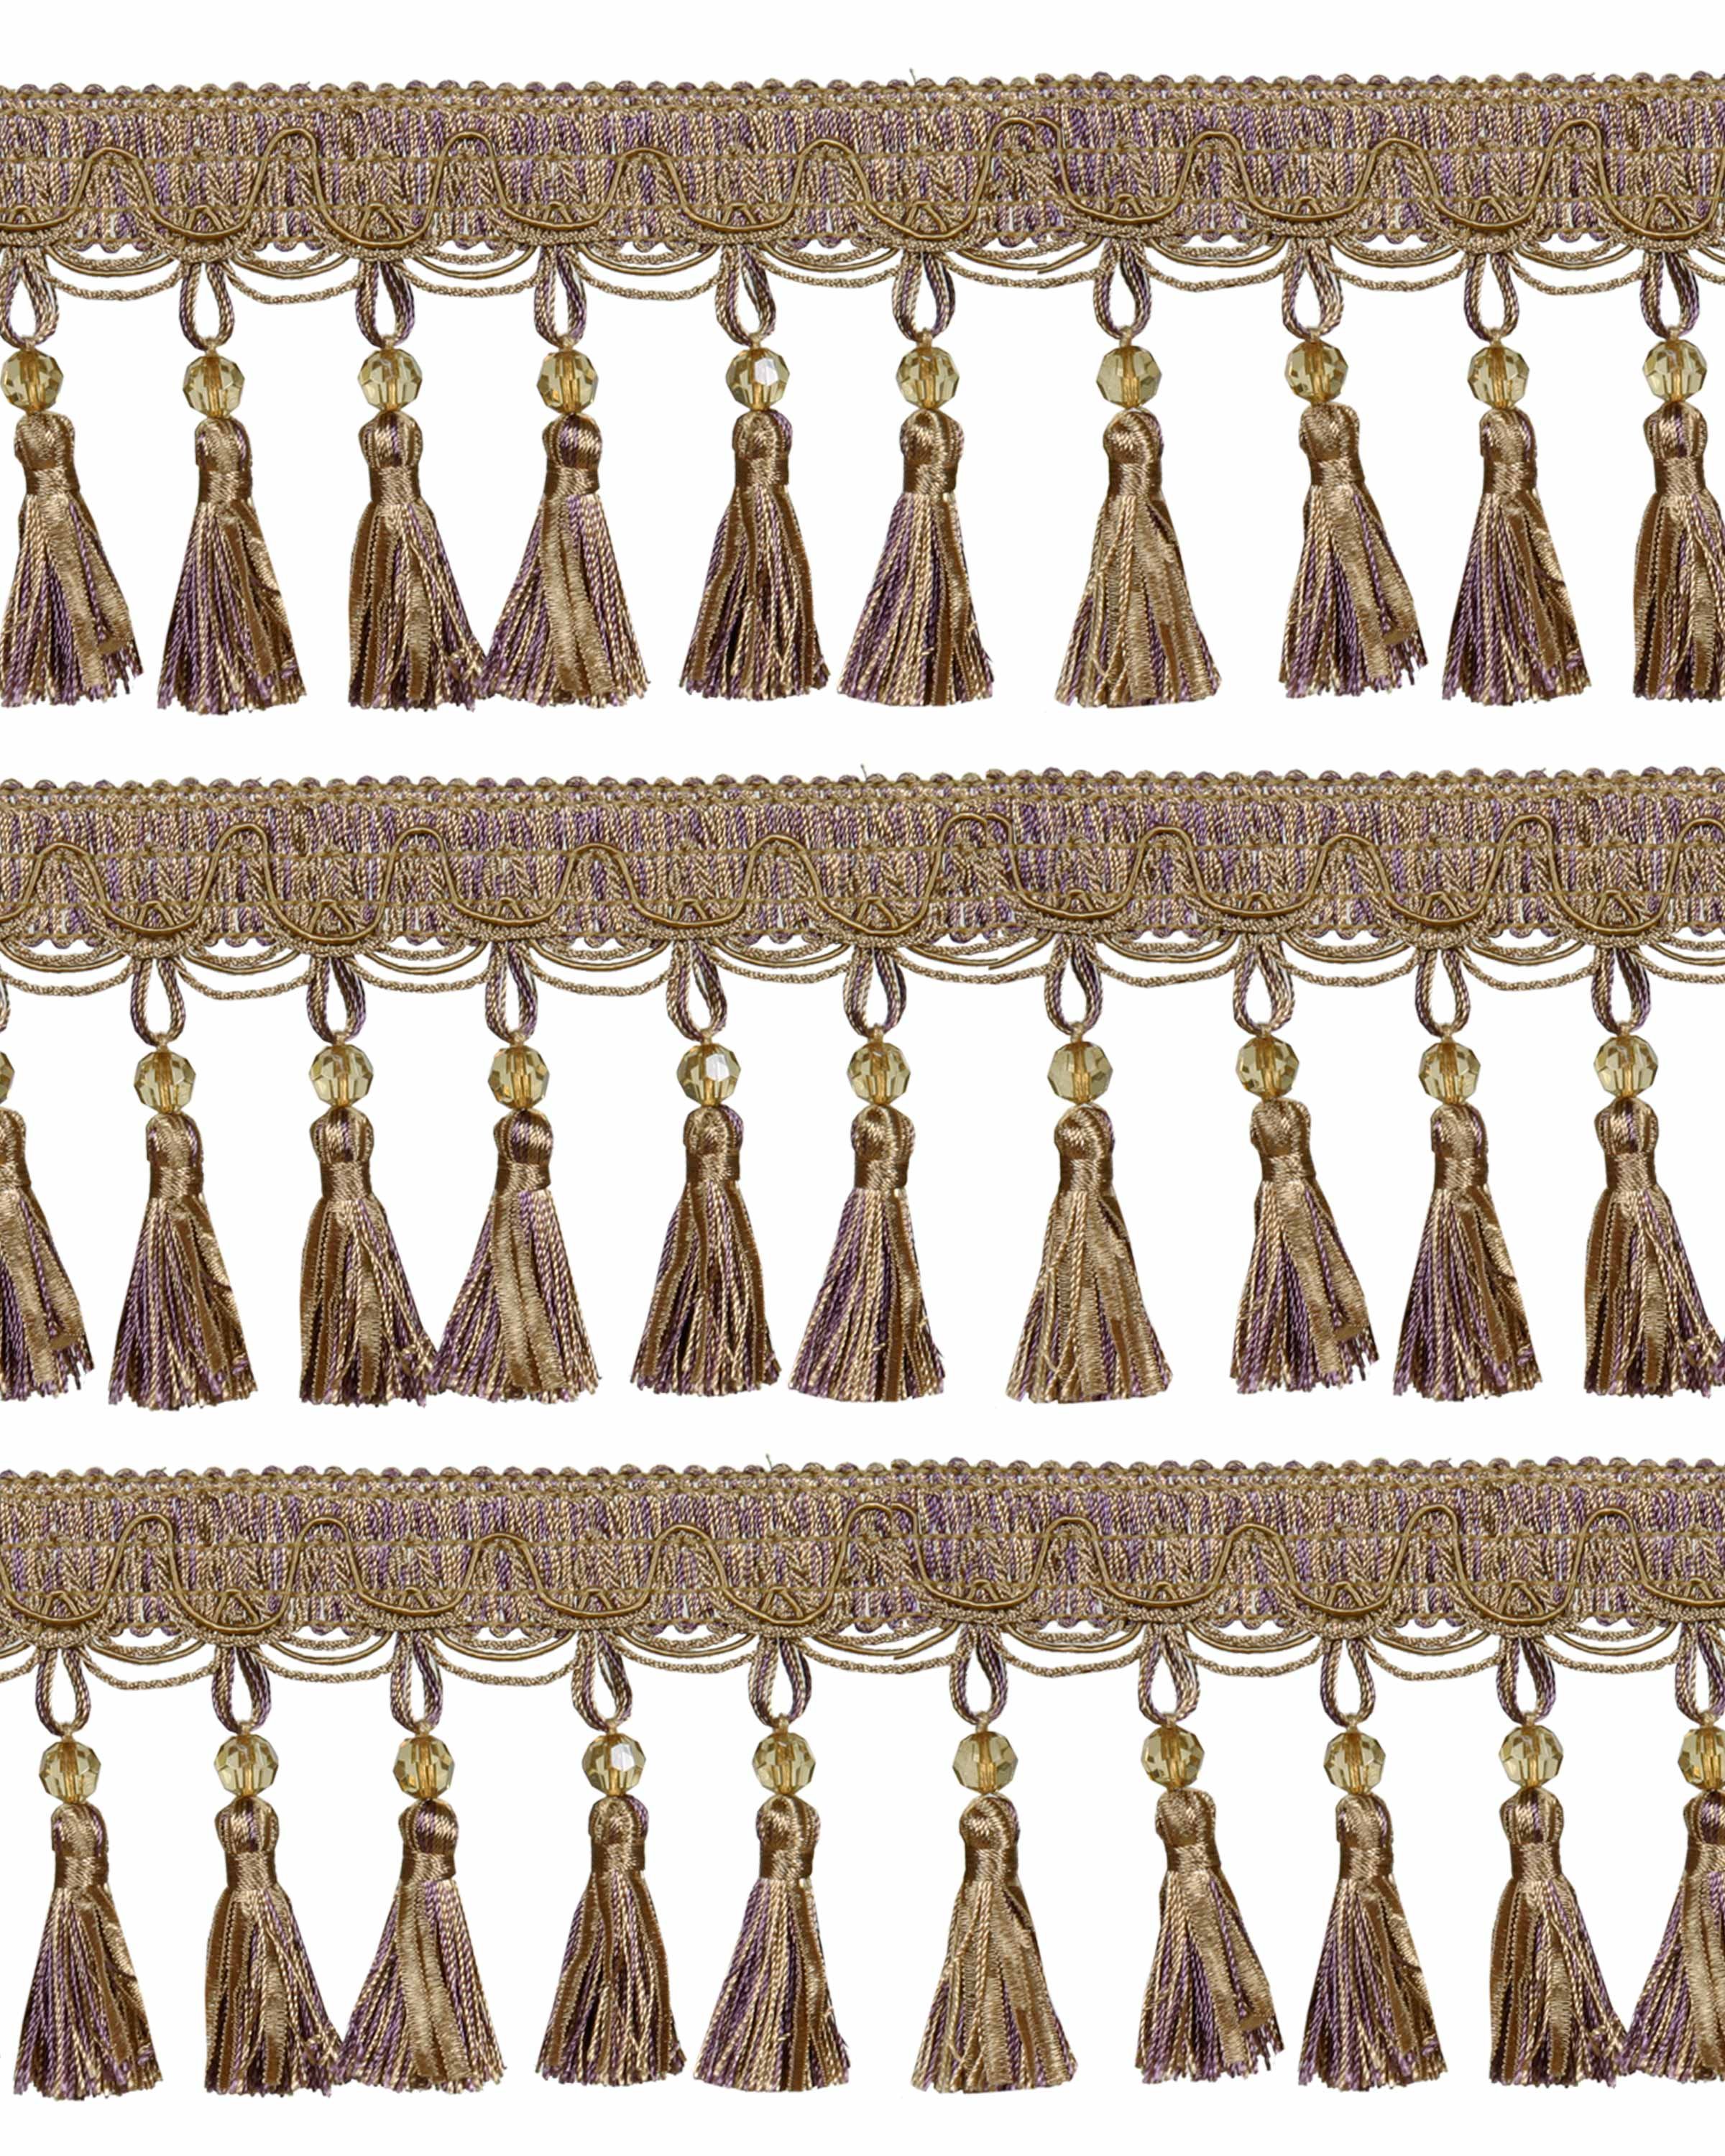 Fringe Tassels with Beads/Ribbons - Purple Gold 90mm Price is per 5 metres